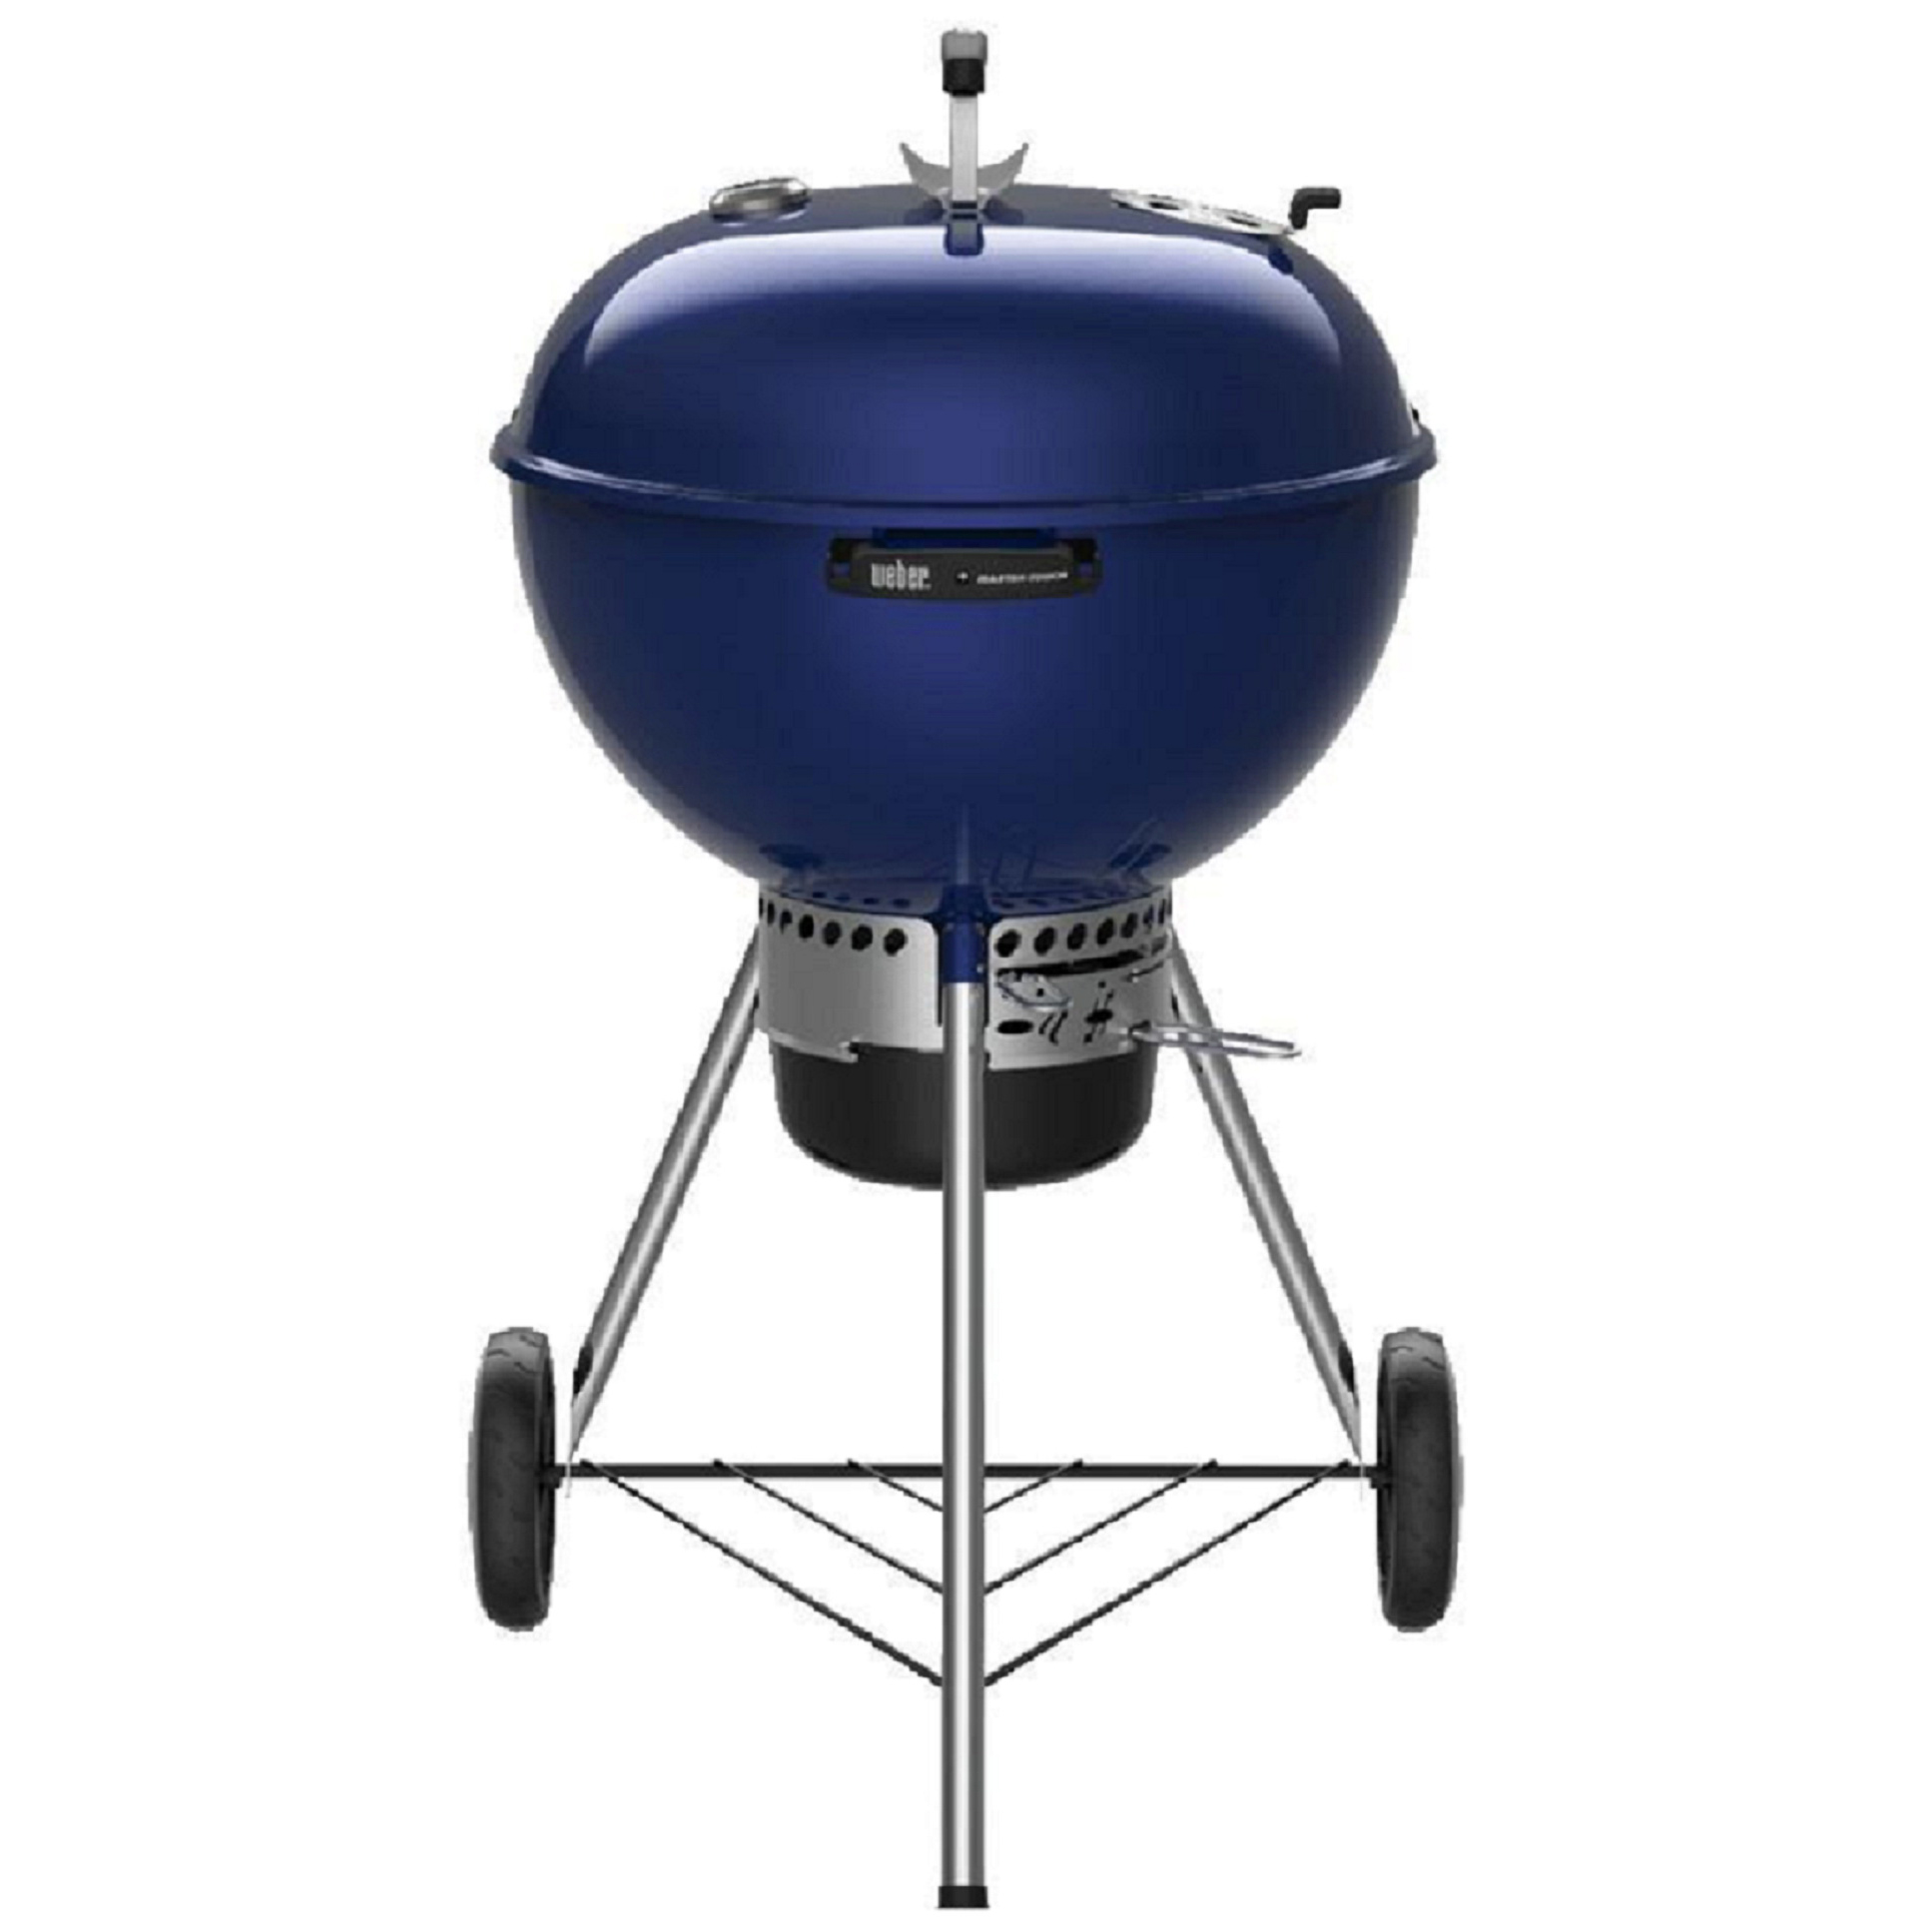 Master-Touch 14516001 Charcoal Grill, 1-Grate, 363 sq-in Primary Cooking Surface, Deep Ocean Blue